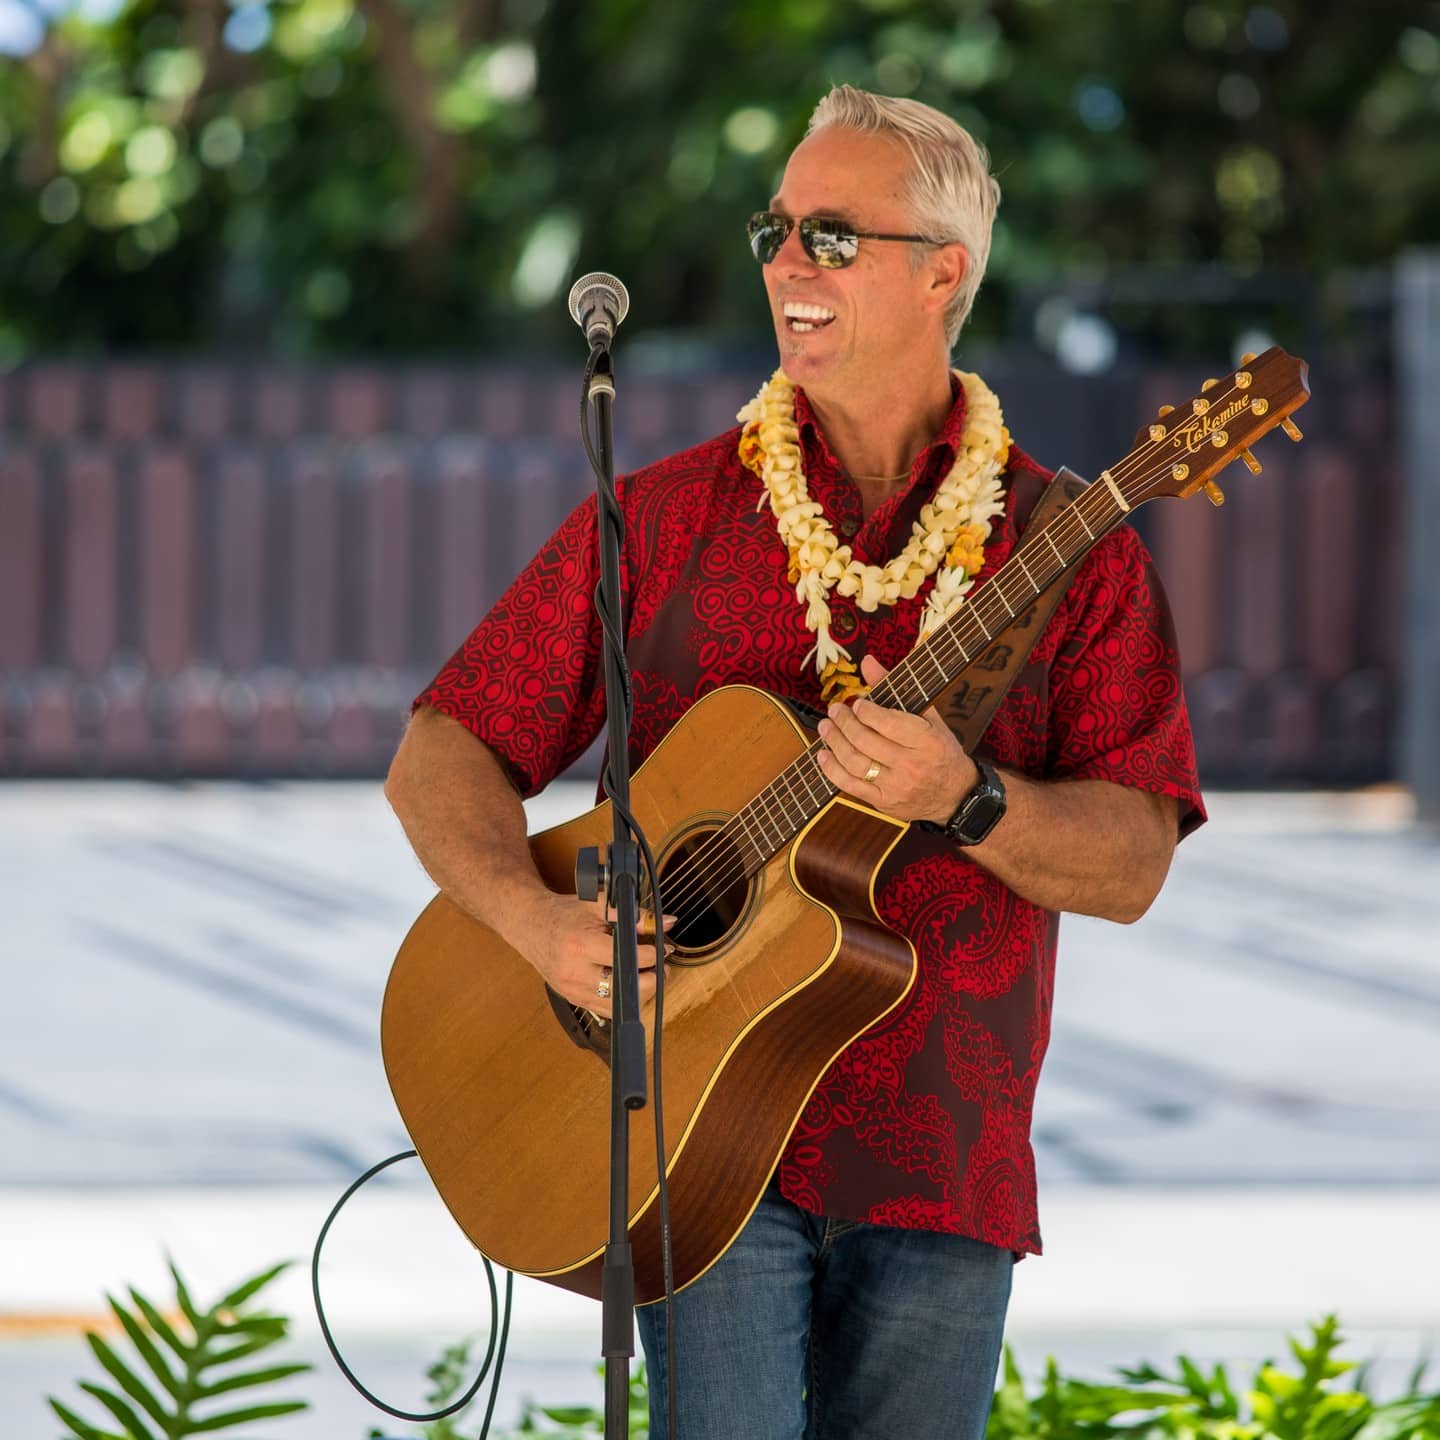 Save the date for our next Aloha Friday Holiday Music Series! Take a break from your holiday shopping and listen to seasonal songs from Bobby Moderow on Friday, December 9 from 12pm – 1pm at the South Shore Market courtyard. #wardvillage #hawaii #slackkeyguitar #oahu